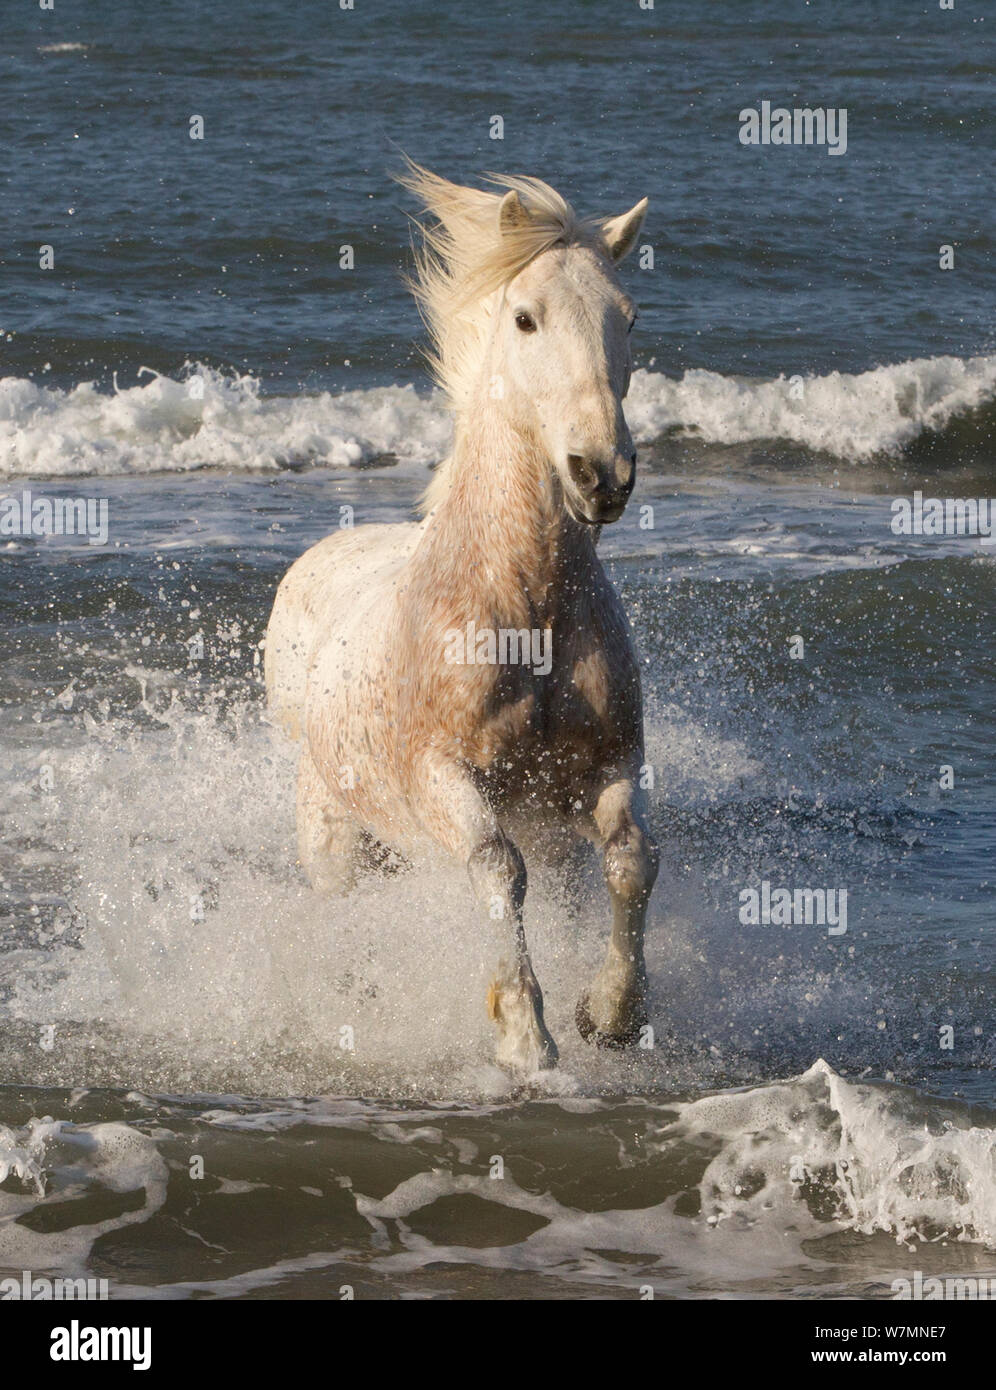 White horse of the Camargue, running from the sea, Camargue, Southern France Stock Photo